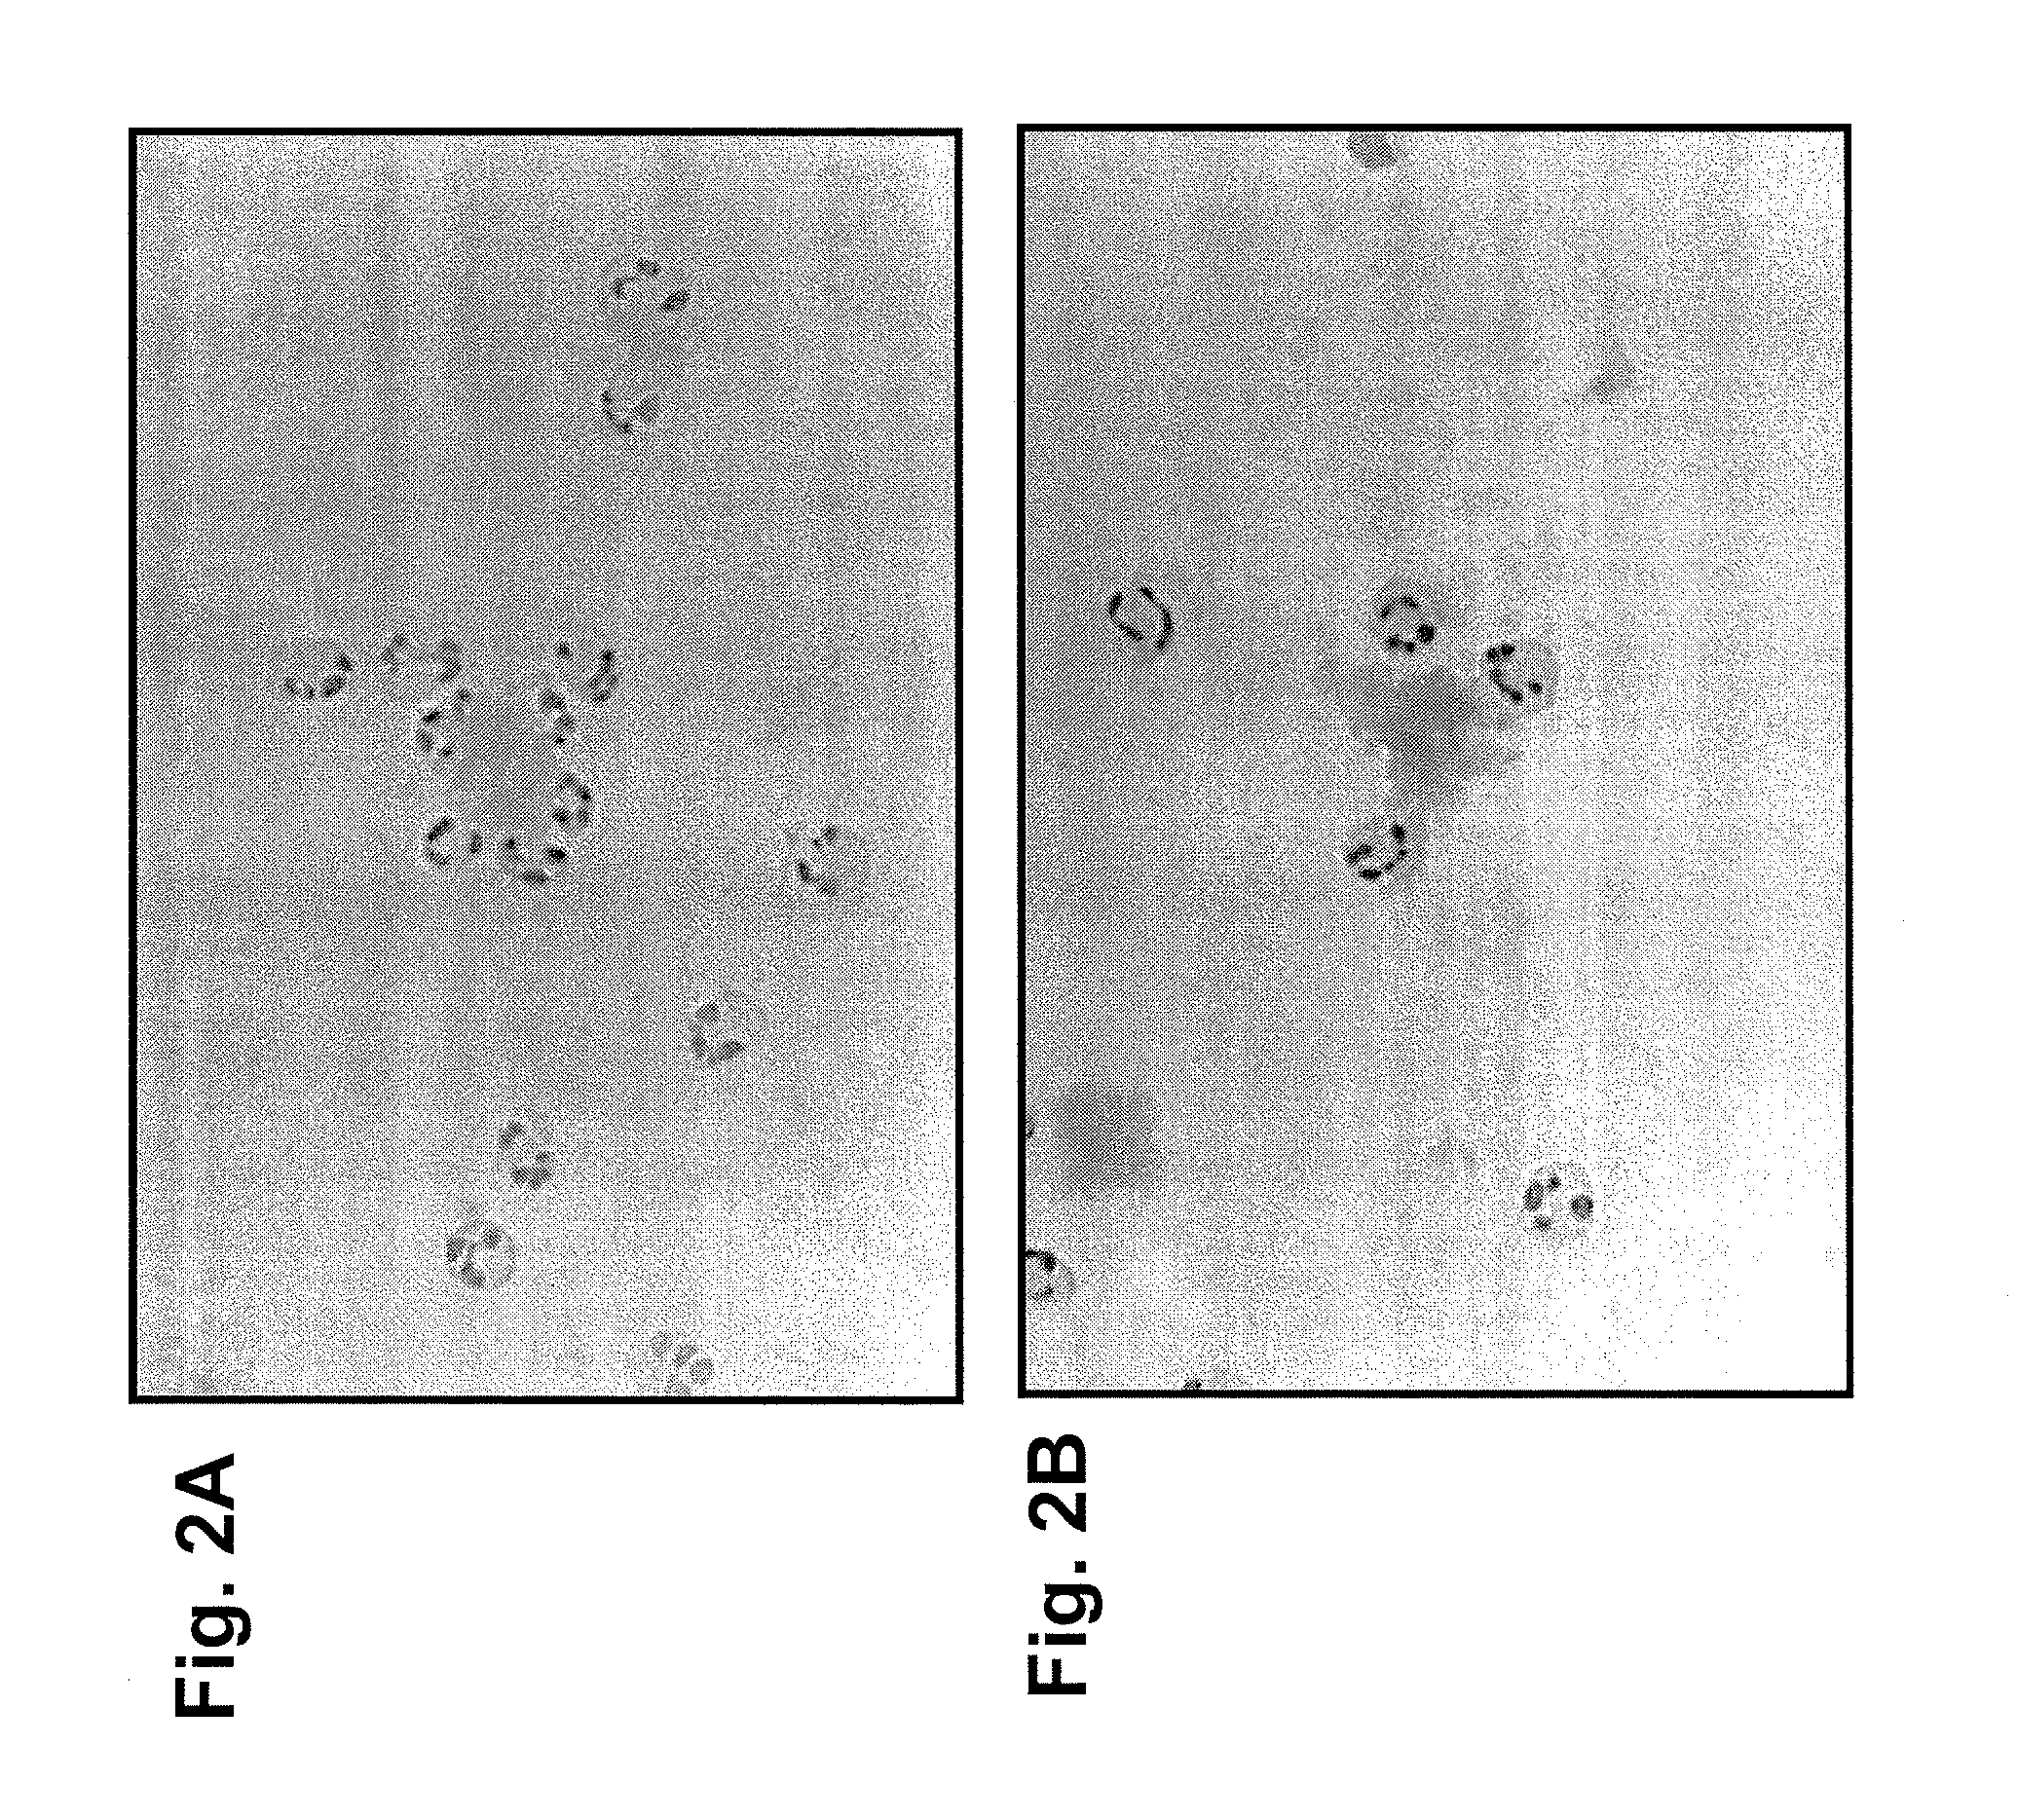 Methods for amyloid removal using Anti-amyloid antibodies